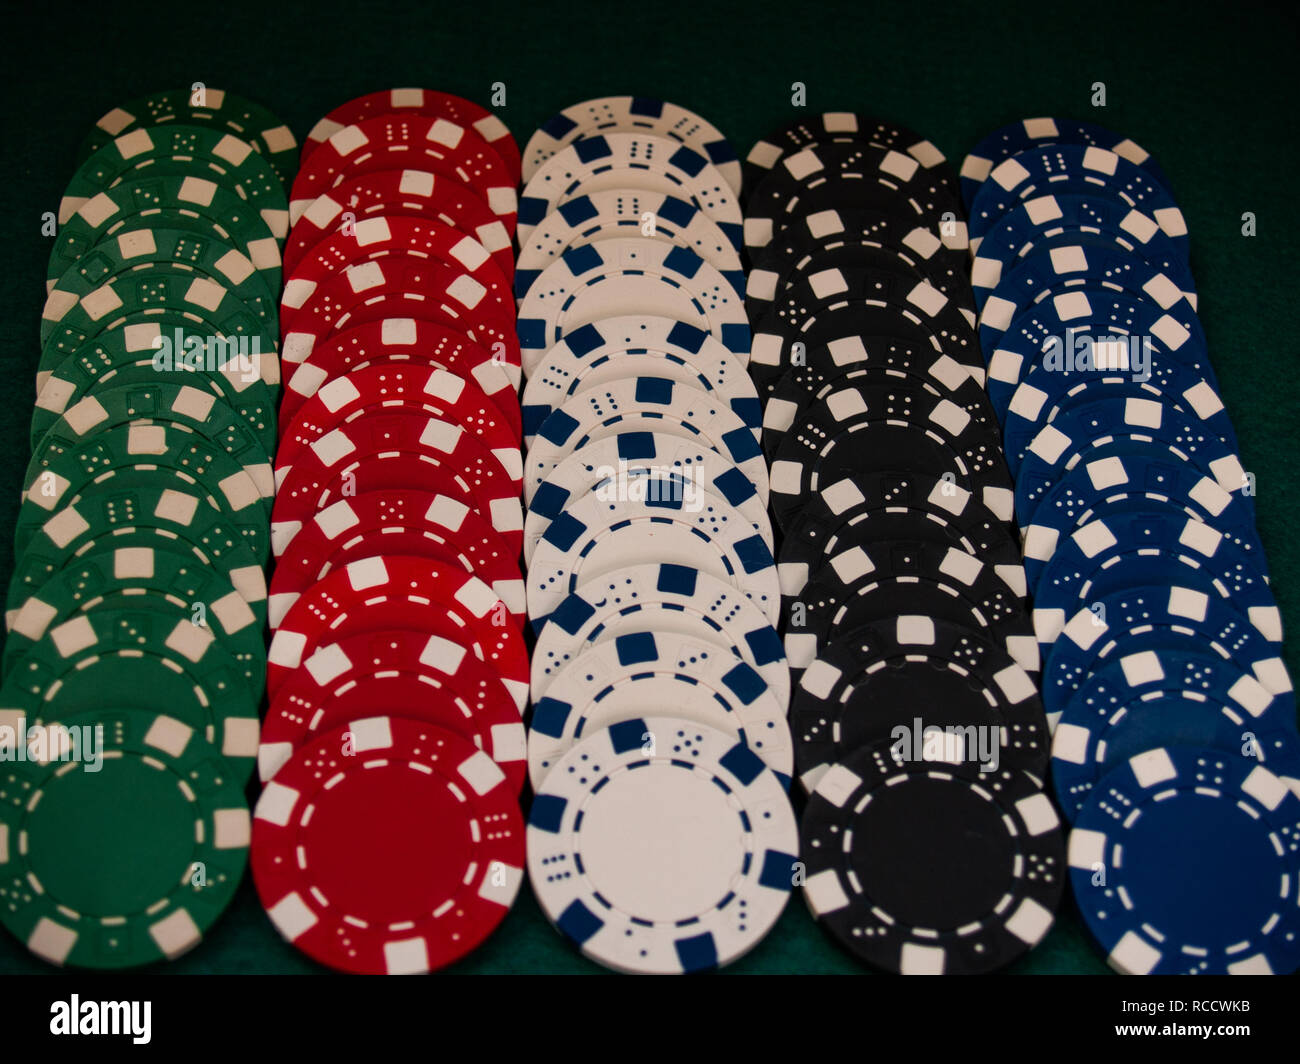 Poker chips of various colors on a green mat Stock Photo